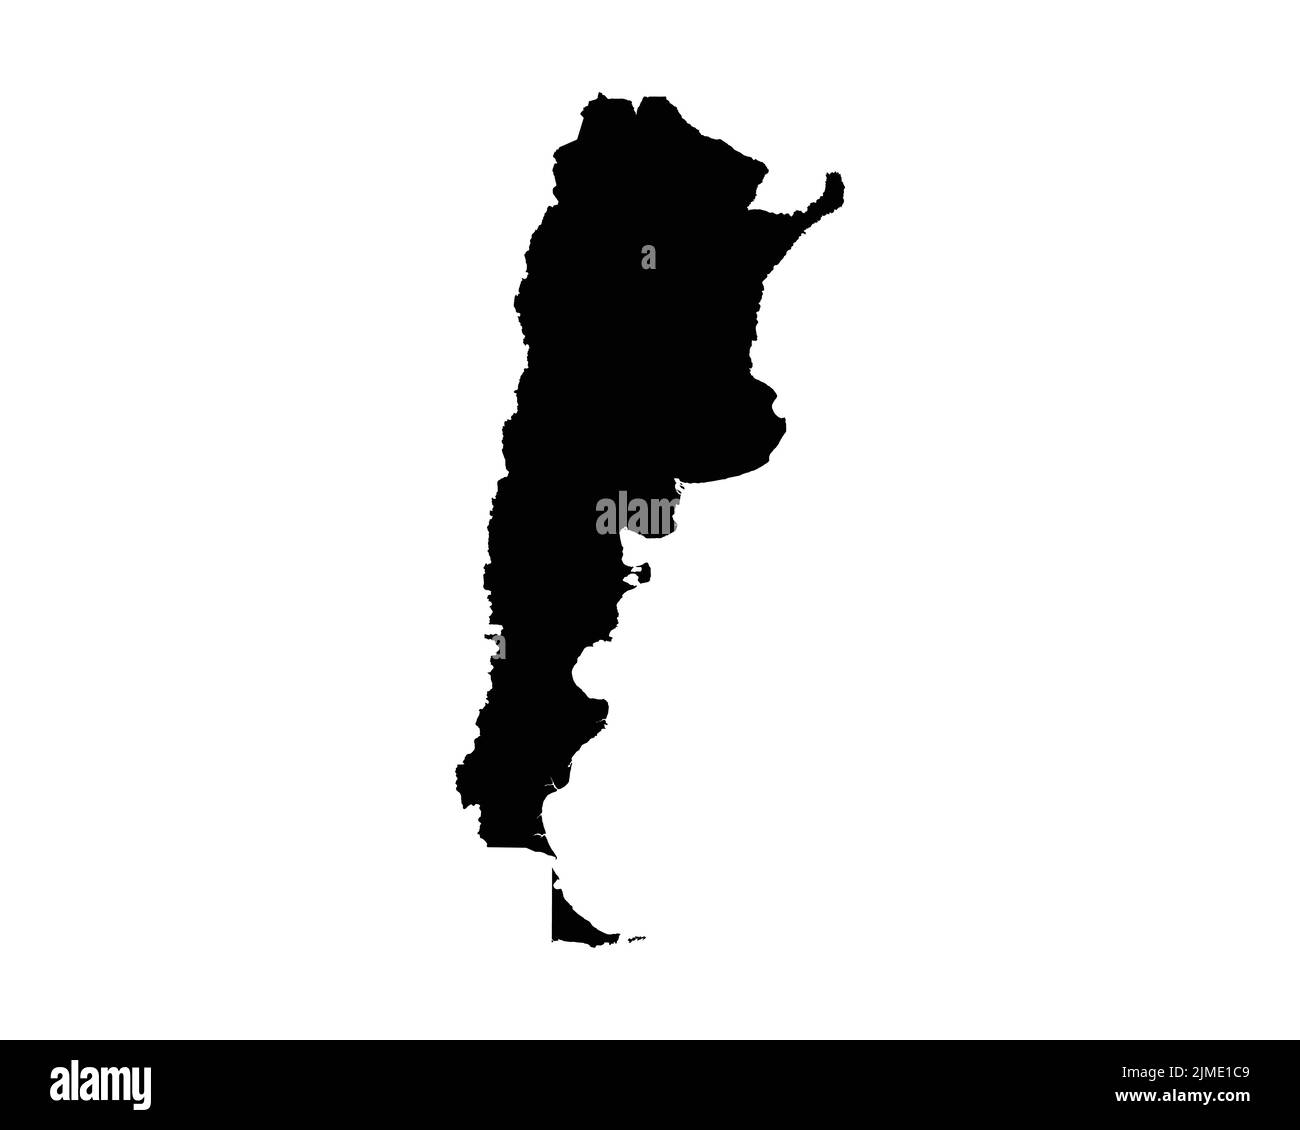 Argentina Map. Argentine Country Map. Argentinian Black and White National Outline Boundary Border Shape Geography Territory EPS Vector Illustration C Stock Vector